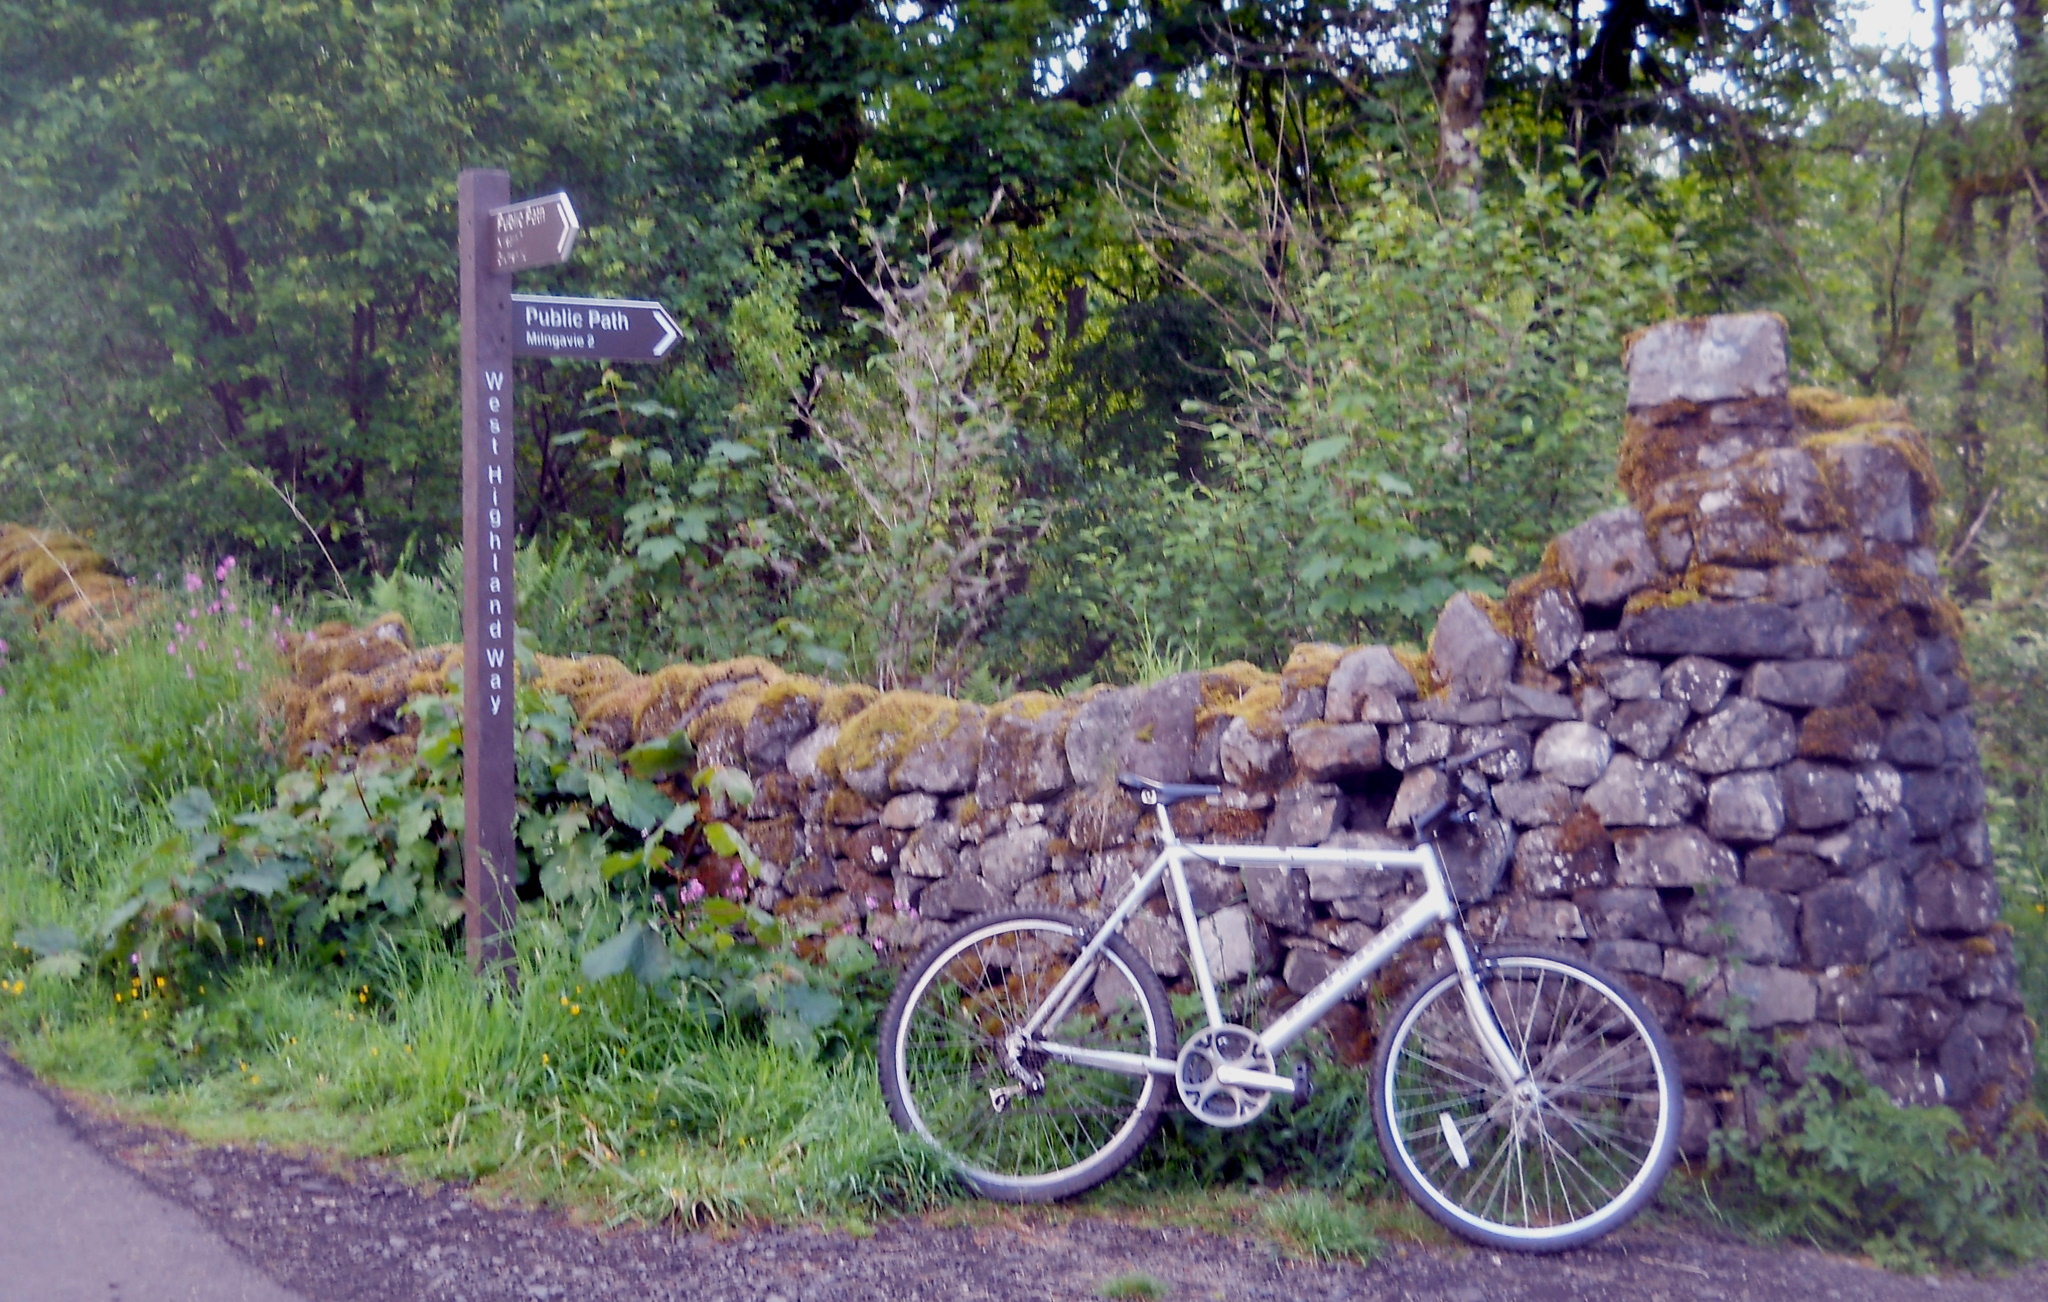 Exit at Khyber Pass from Mugdock Country Park